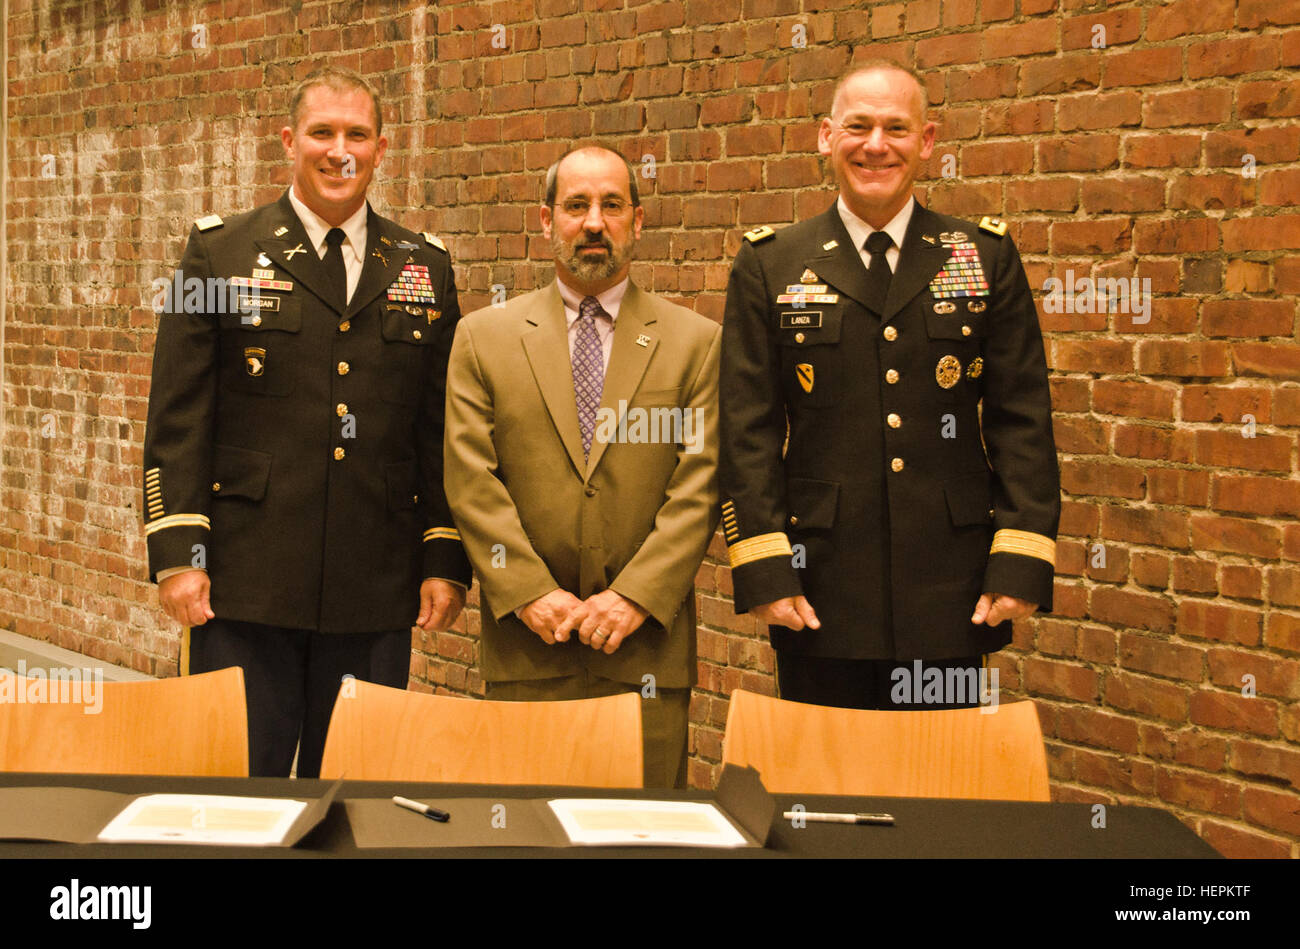 Col. Daniel S. Morgan, commander, Joint Base Lewis-McChord, left, Mark A. Pagano, chancellor, University of Washington-Tacoma, center, and Lt. Gen. Stephen R. Lanza, commanding general, I Corps, JBLM, right, come together to sign partnership resolutions at the UW-T, Oct. 29, 2015. Both JBLM and I Corps signed partnership resolutions with the UW-T agreeing to become a model university and military institutional partnership. (U.S. Army photo by Sgt. Jasmine Higgins, 28th Public Affairs Detachment) Signing 151030-A-HS859-119 Stock Photo